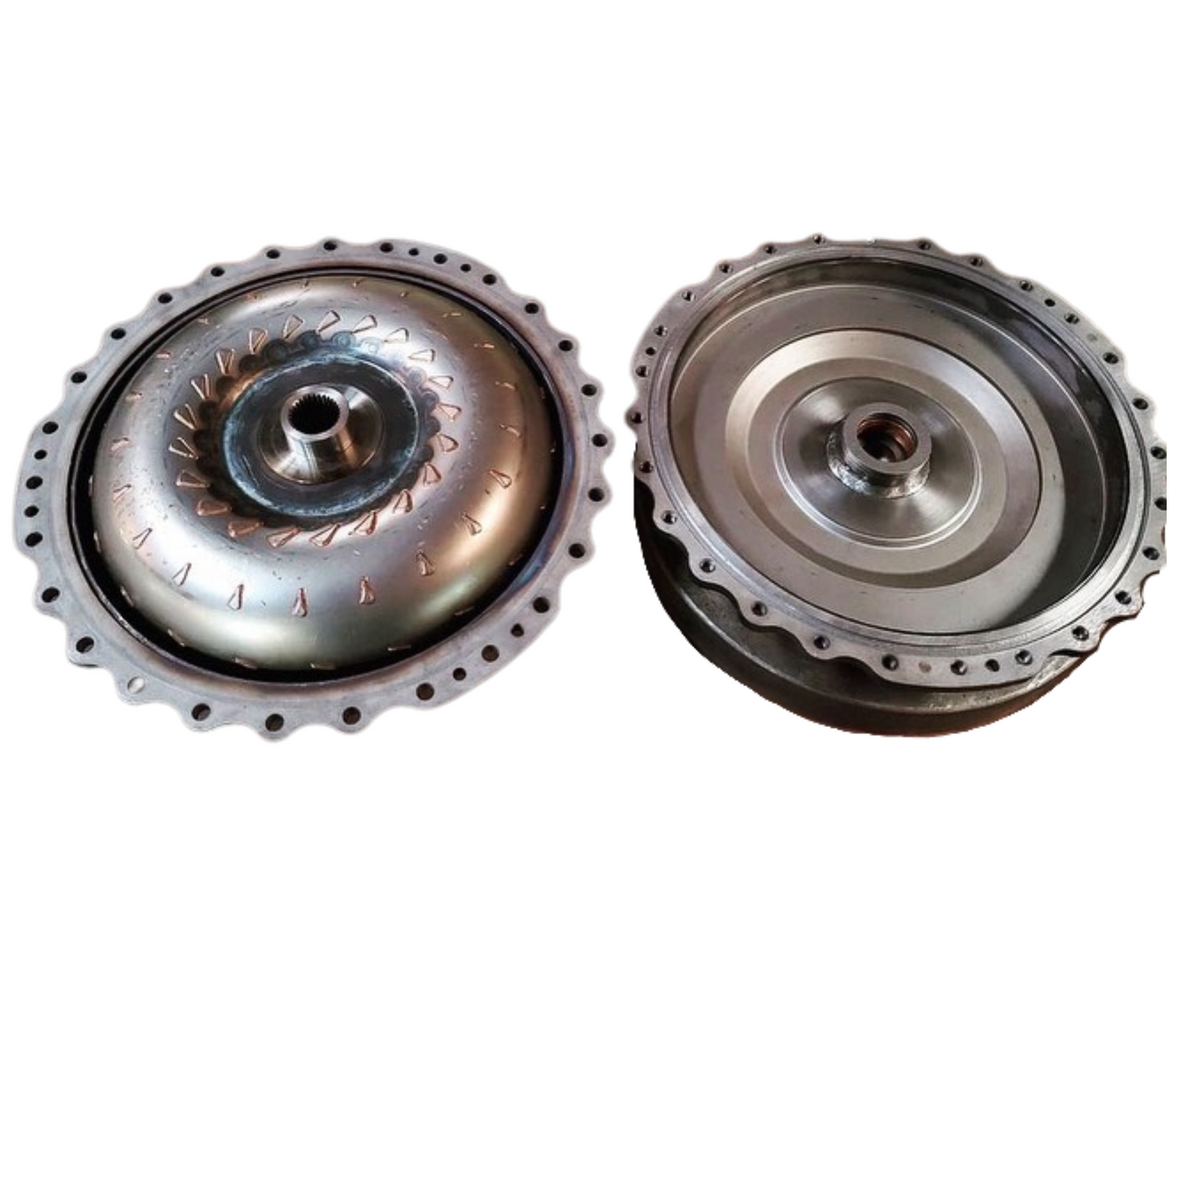 Inside The Crowerglide Automatic Clutch